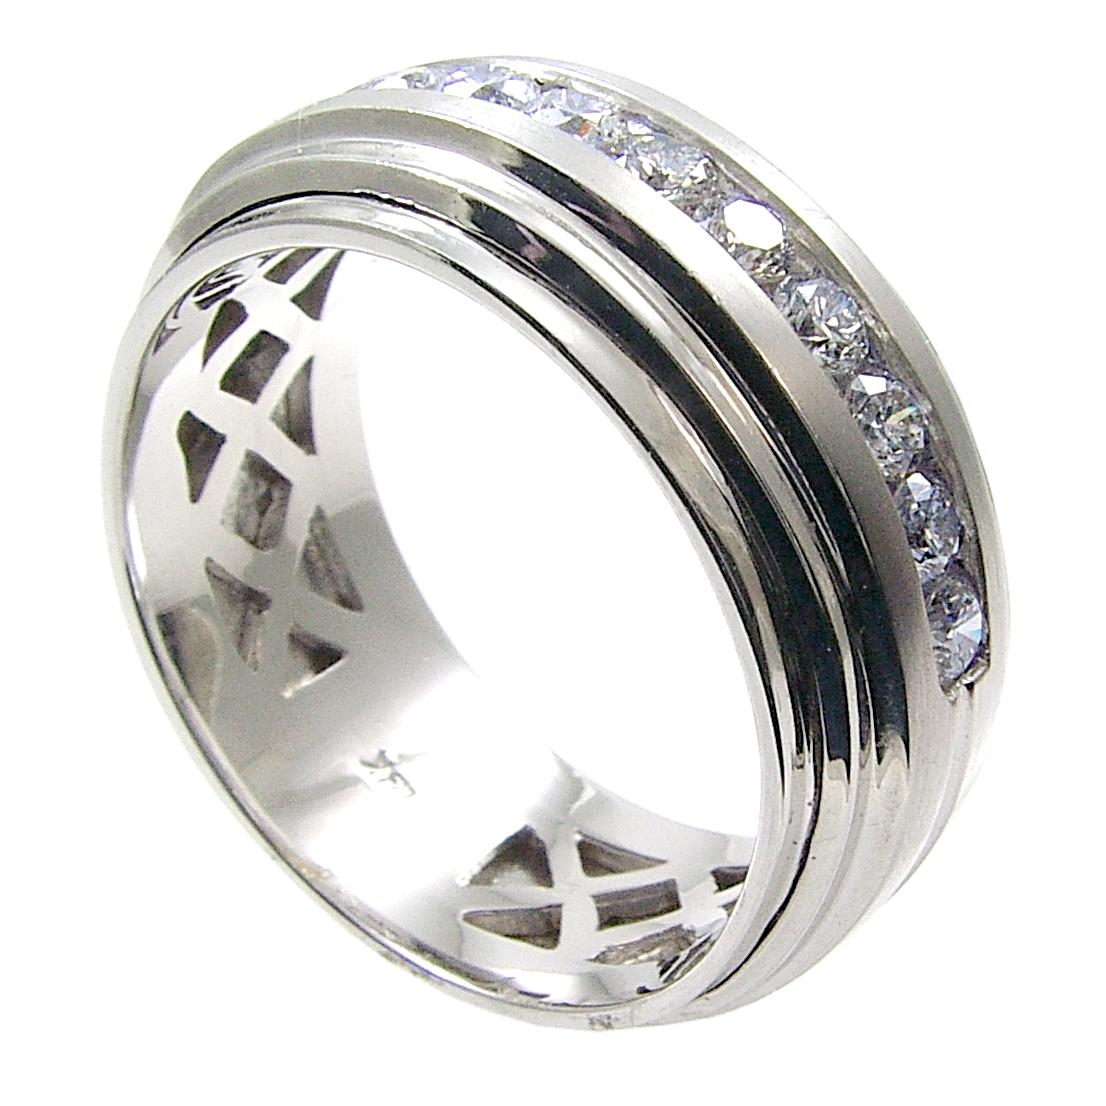 This Beautiful Gent's ring is made in 18K white gold with shiny finish on the sides and mat finish in the middle. It has 10 pieces of perfectly matched 2.5 mm Round Brilliant Diamonds(Total Weight 0.74 Ct) Channel set on the top. 
Total Diamond